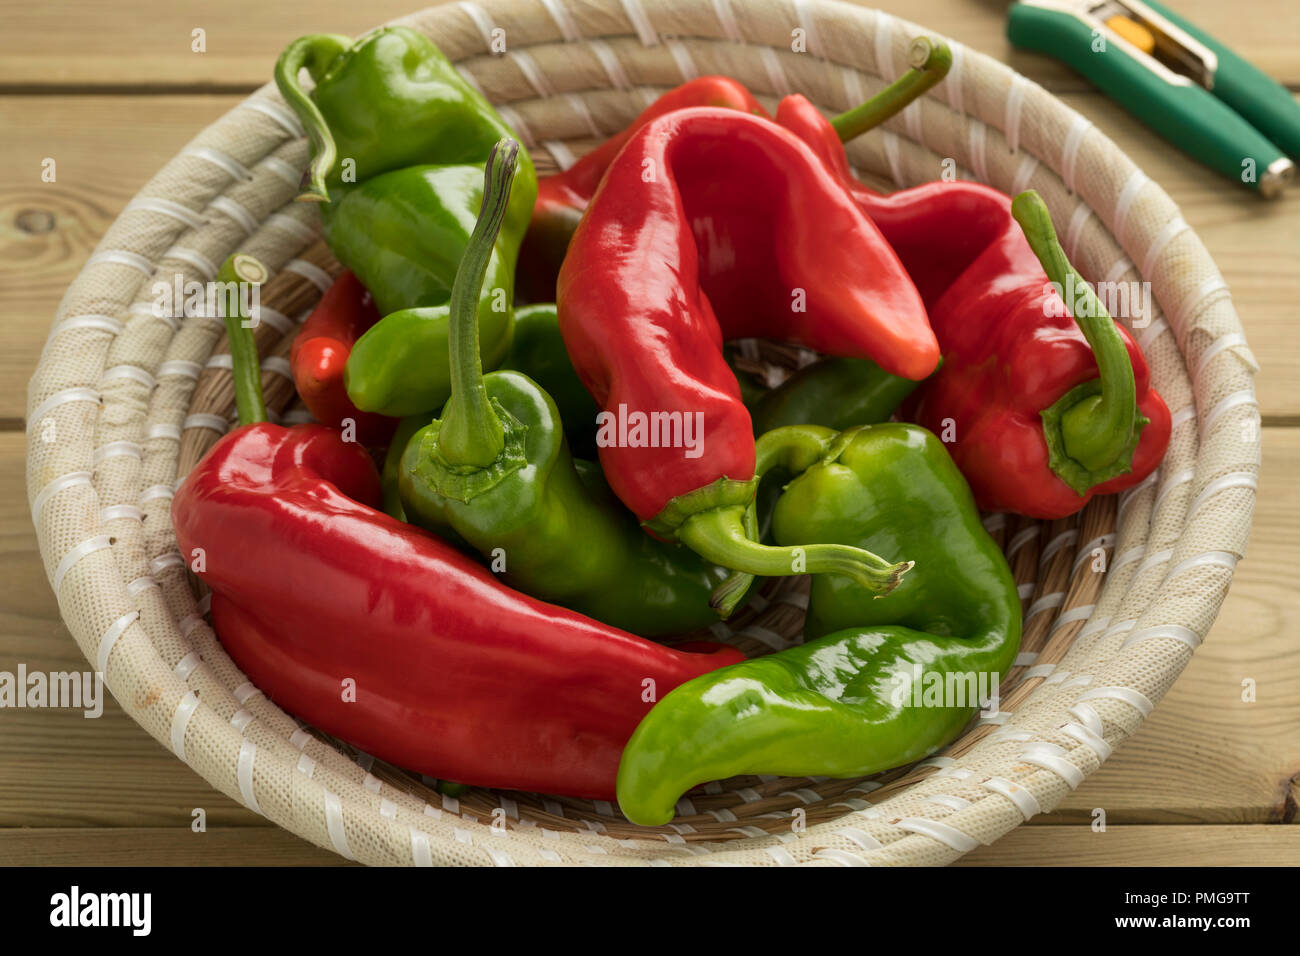 Basket with fresh picked natural shaped organic red and green fresh pointed bell ppepers Stock Photo